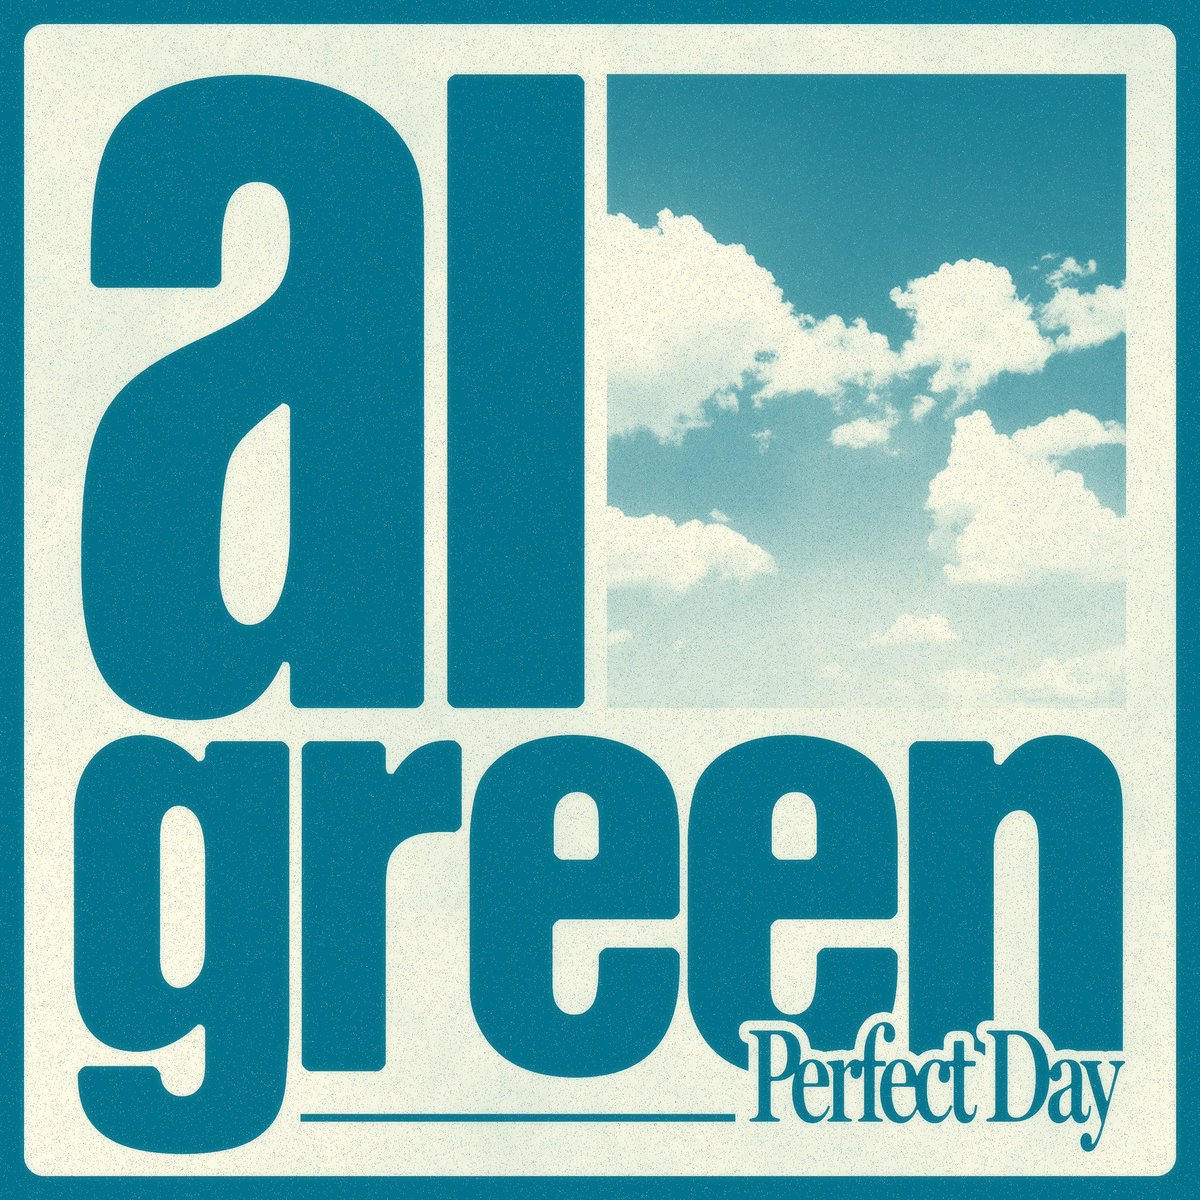 ☀️ ‘Perfect Day’ - the new single - is coming out August 21 on @FatPossum! Pre-save it now via the link below algreen.ffm.to/perfectday